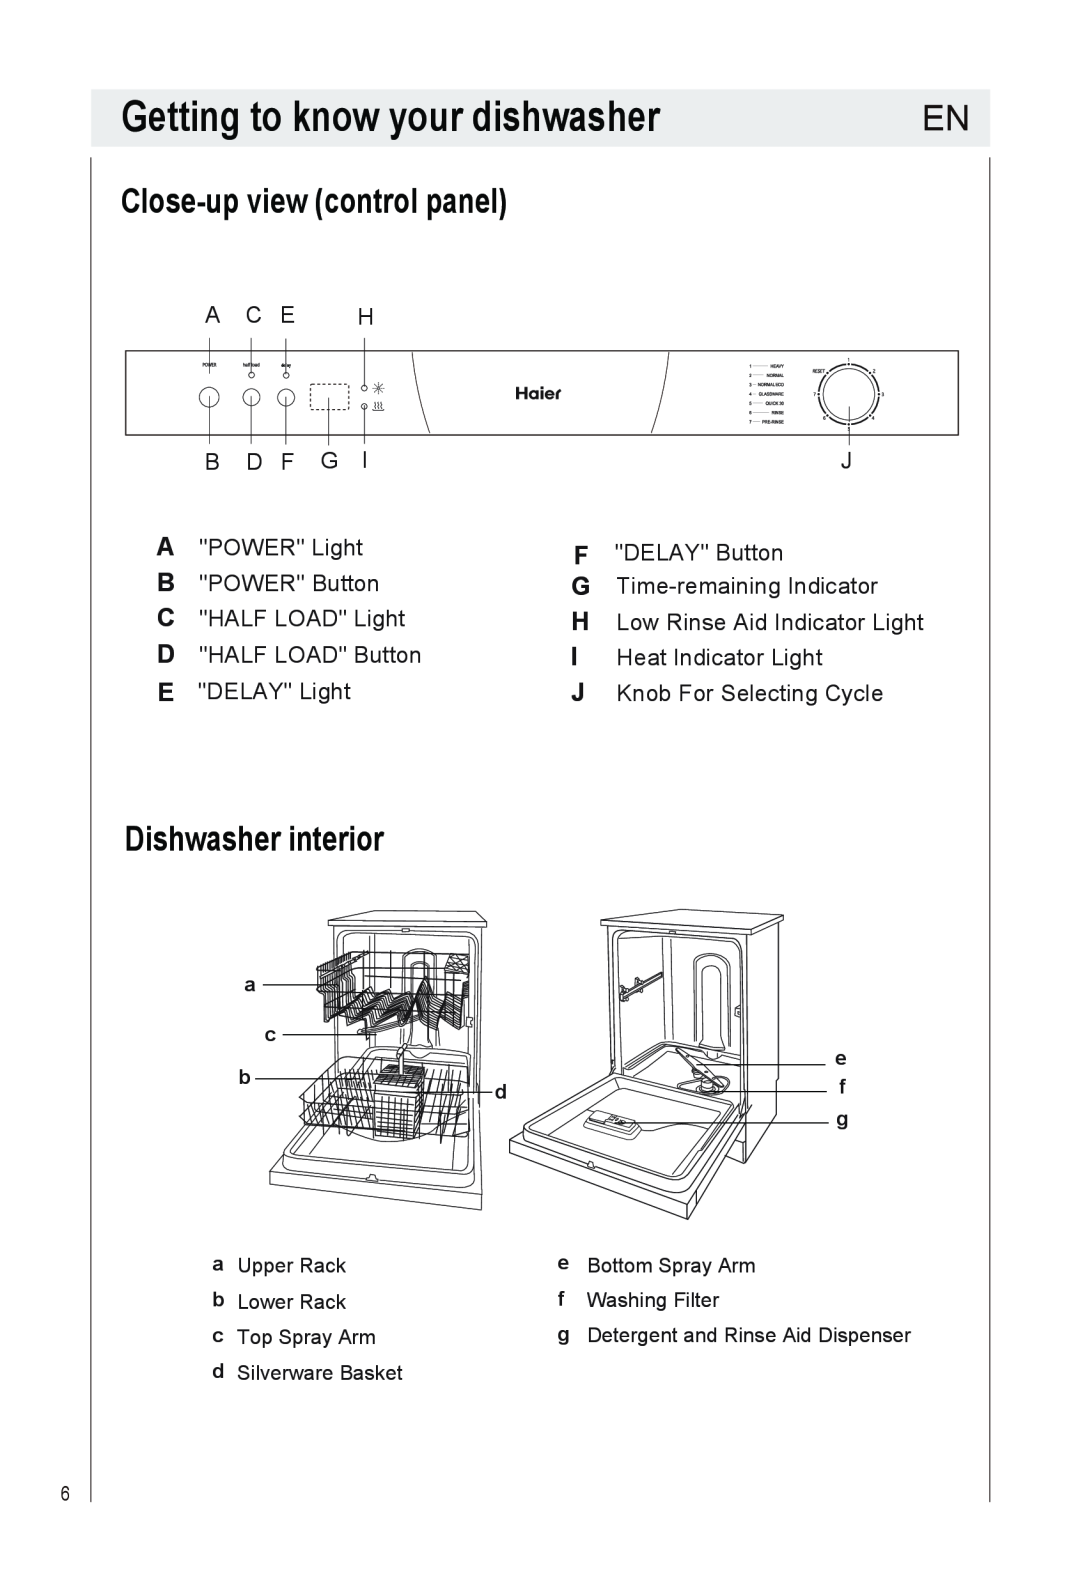 Haier HDW12-TFE3SS, HDW12-TFE3WH manual Getting to know your dishwasher, Close-up view control panel, Dishwasher interior 